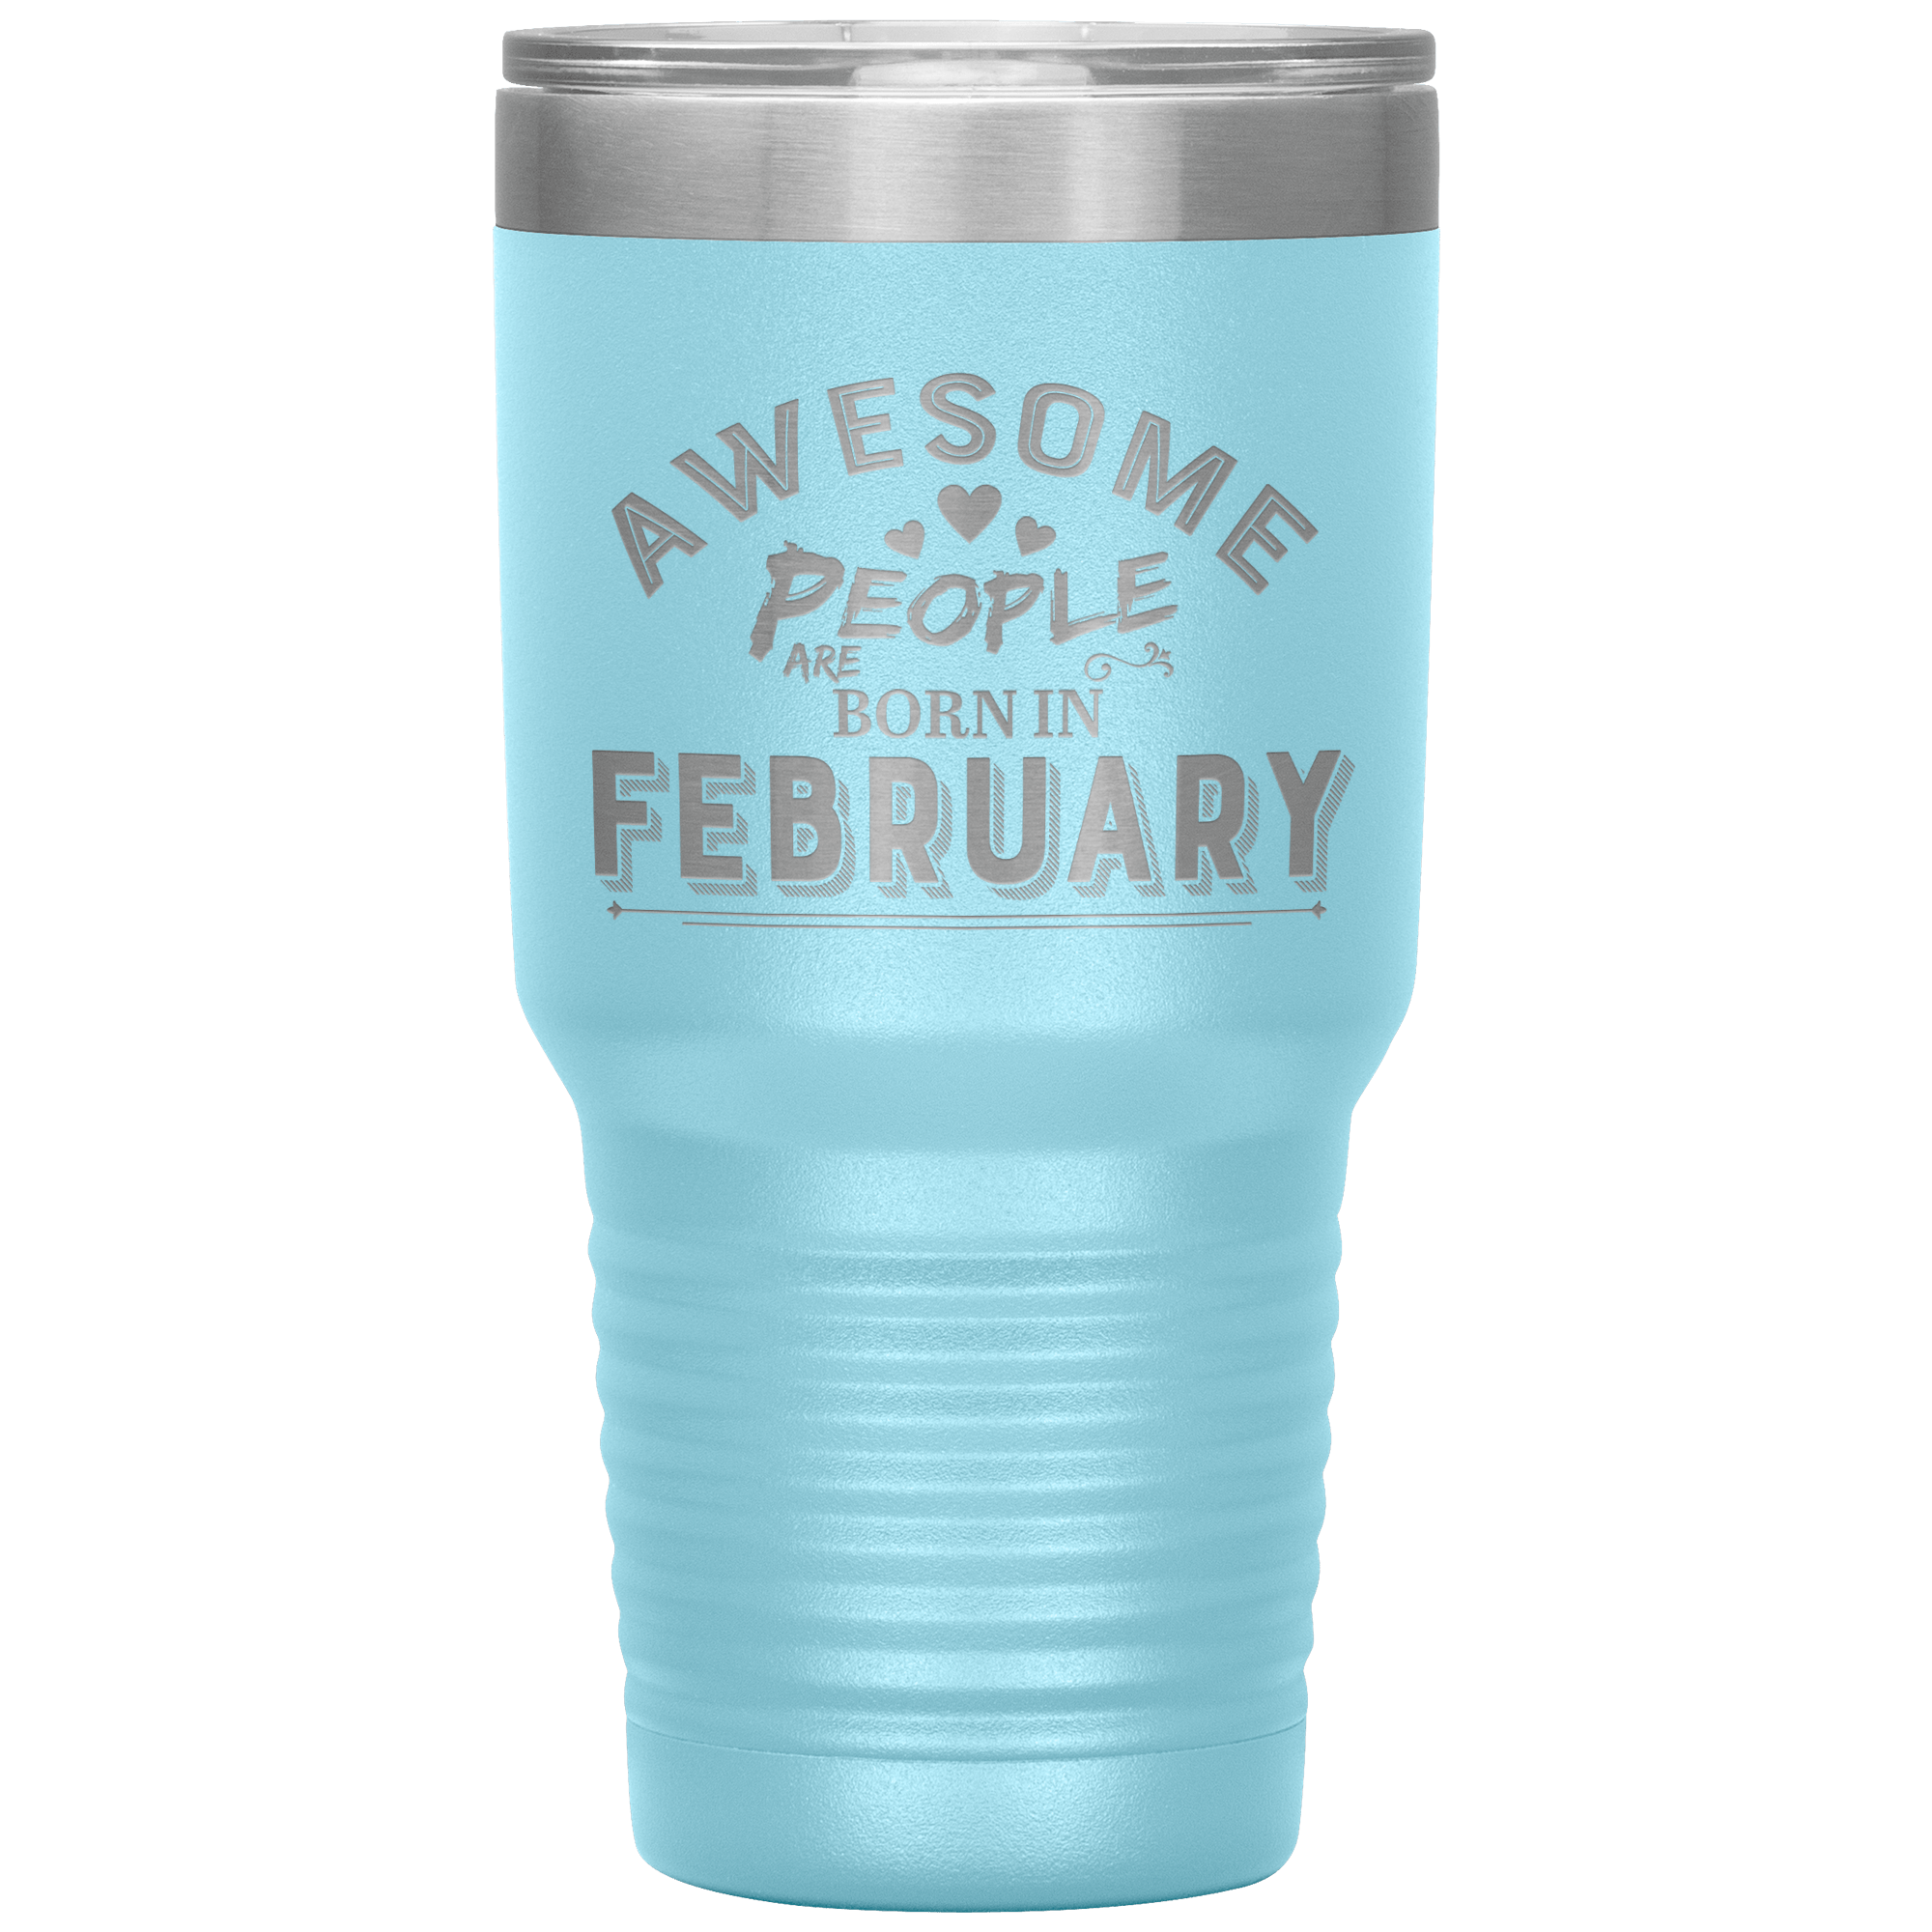 "AWESOME PEOPLE ARE BORN IN FEBRUARY" Tumbler